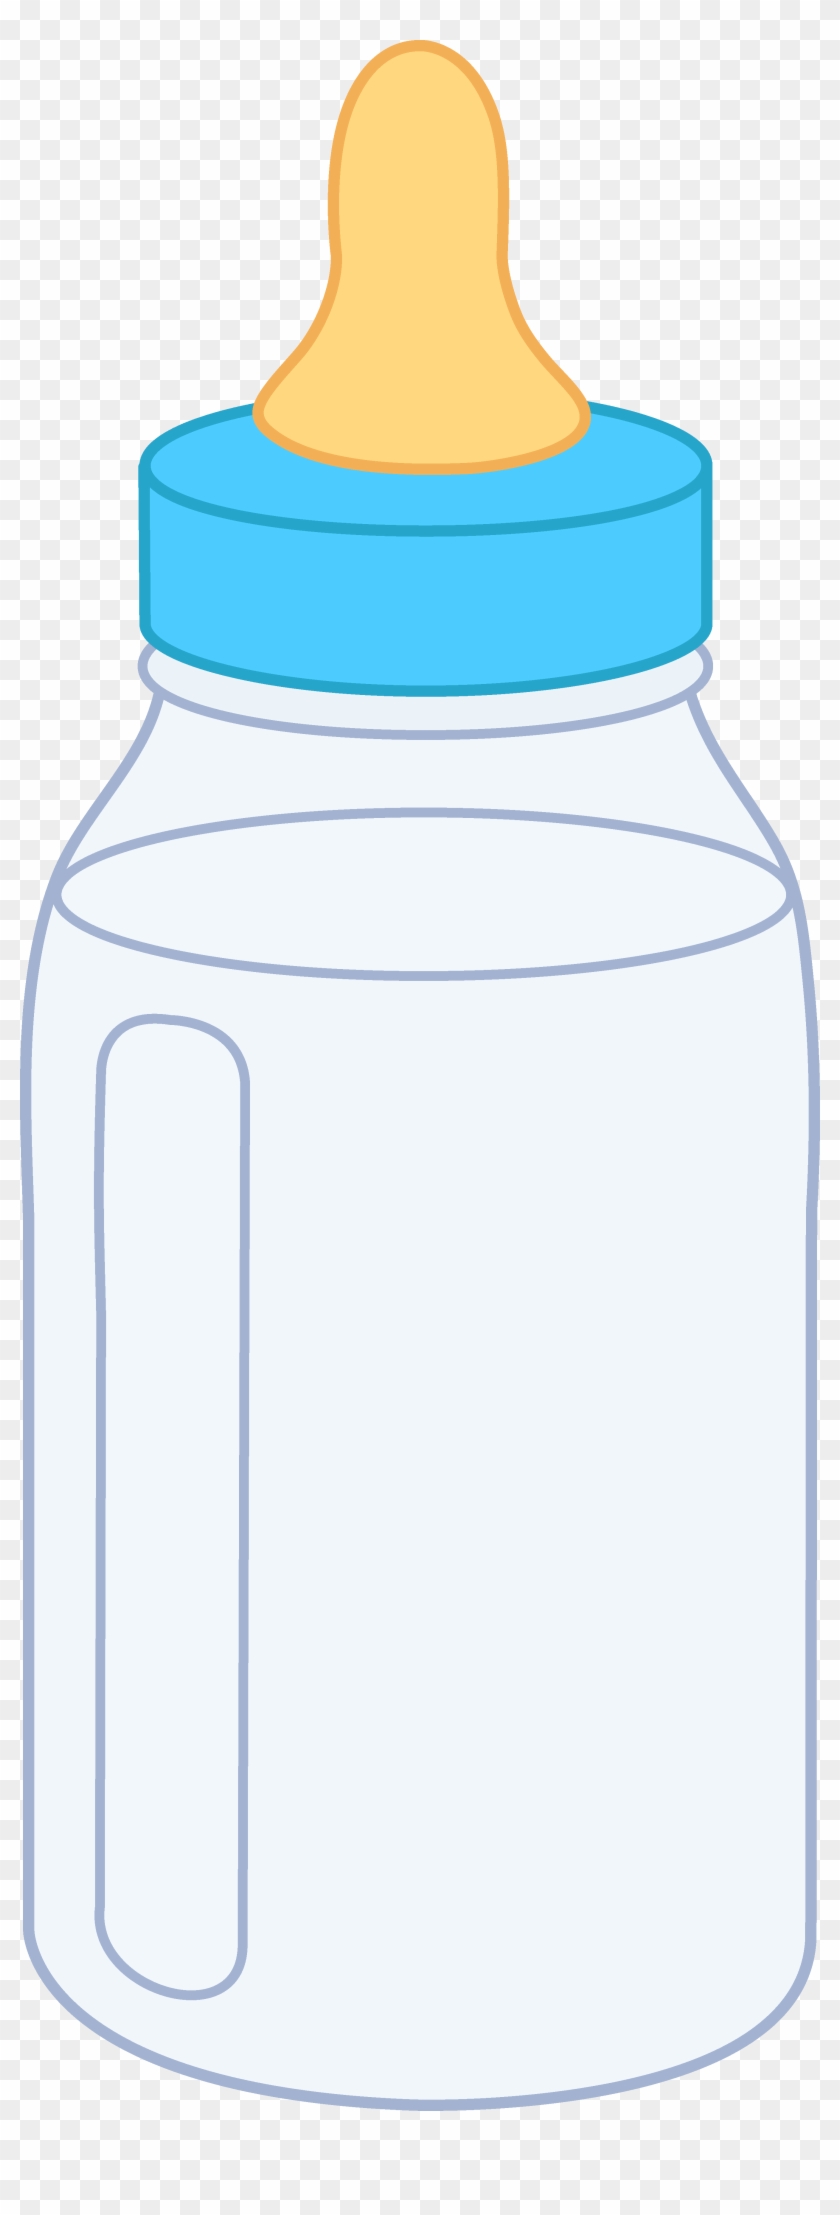 Download Blue Baby Bottle Clipart Baby Bottle Graphic Transparent Background Free Transparent Png Clipart Images Download